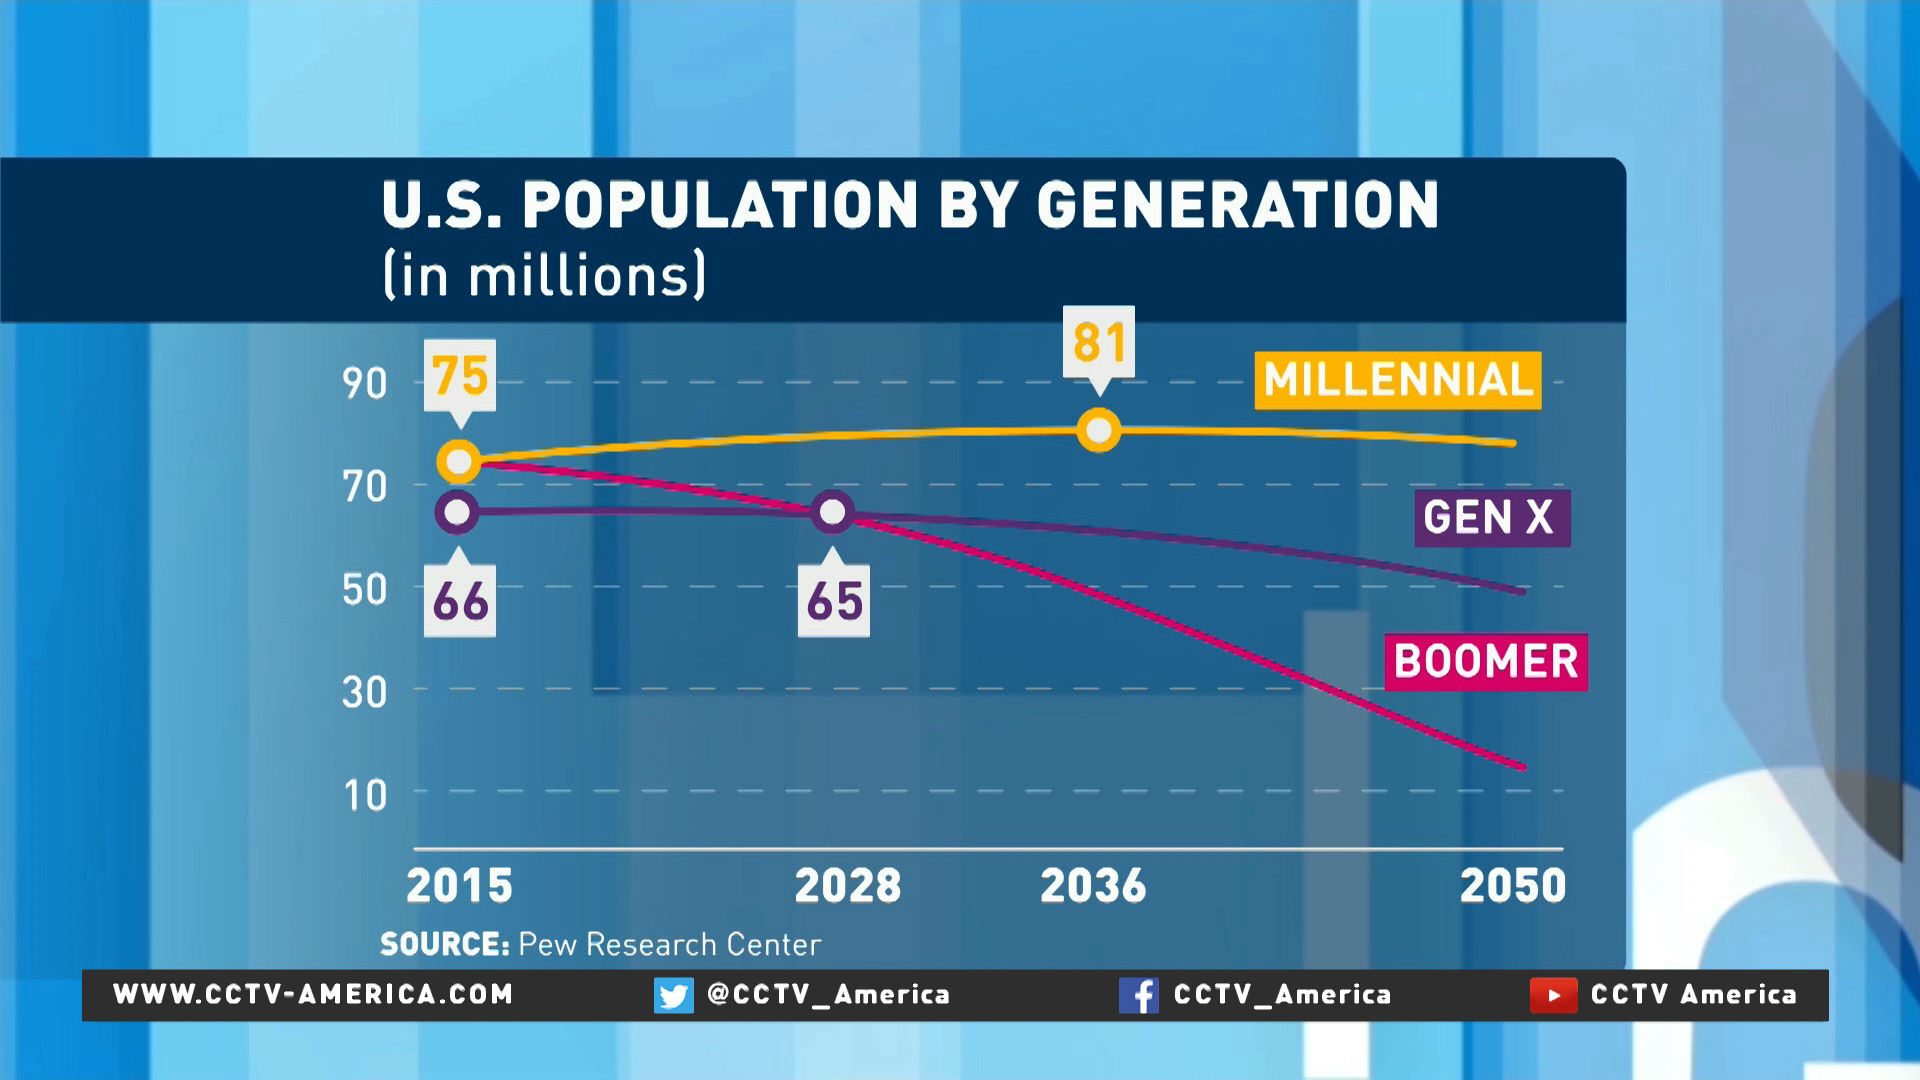 Millennials become largest generation in the United States